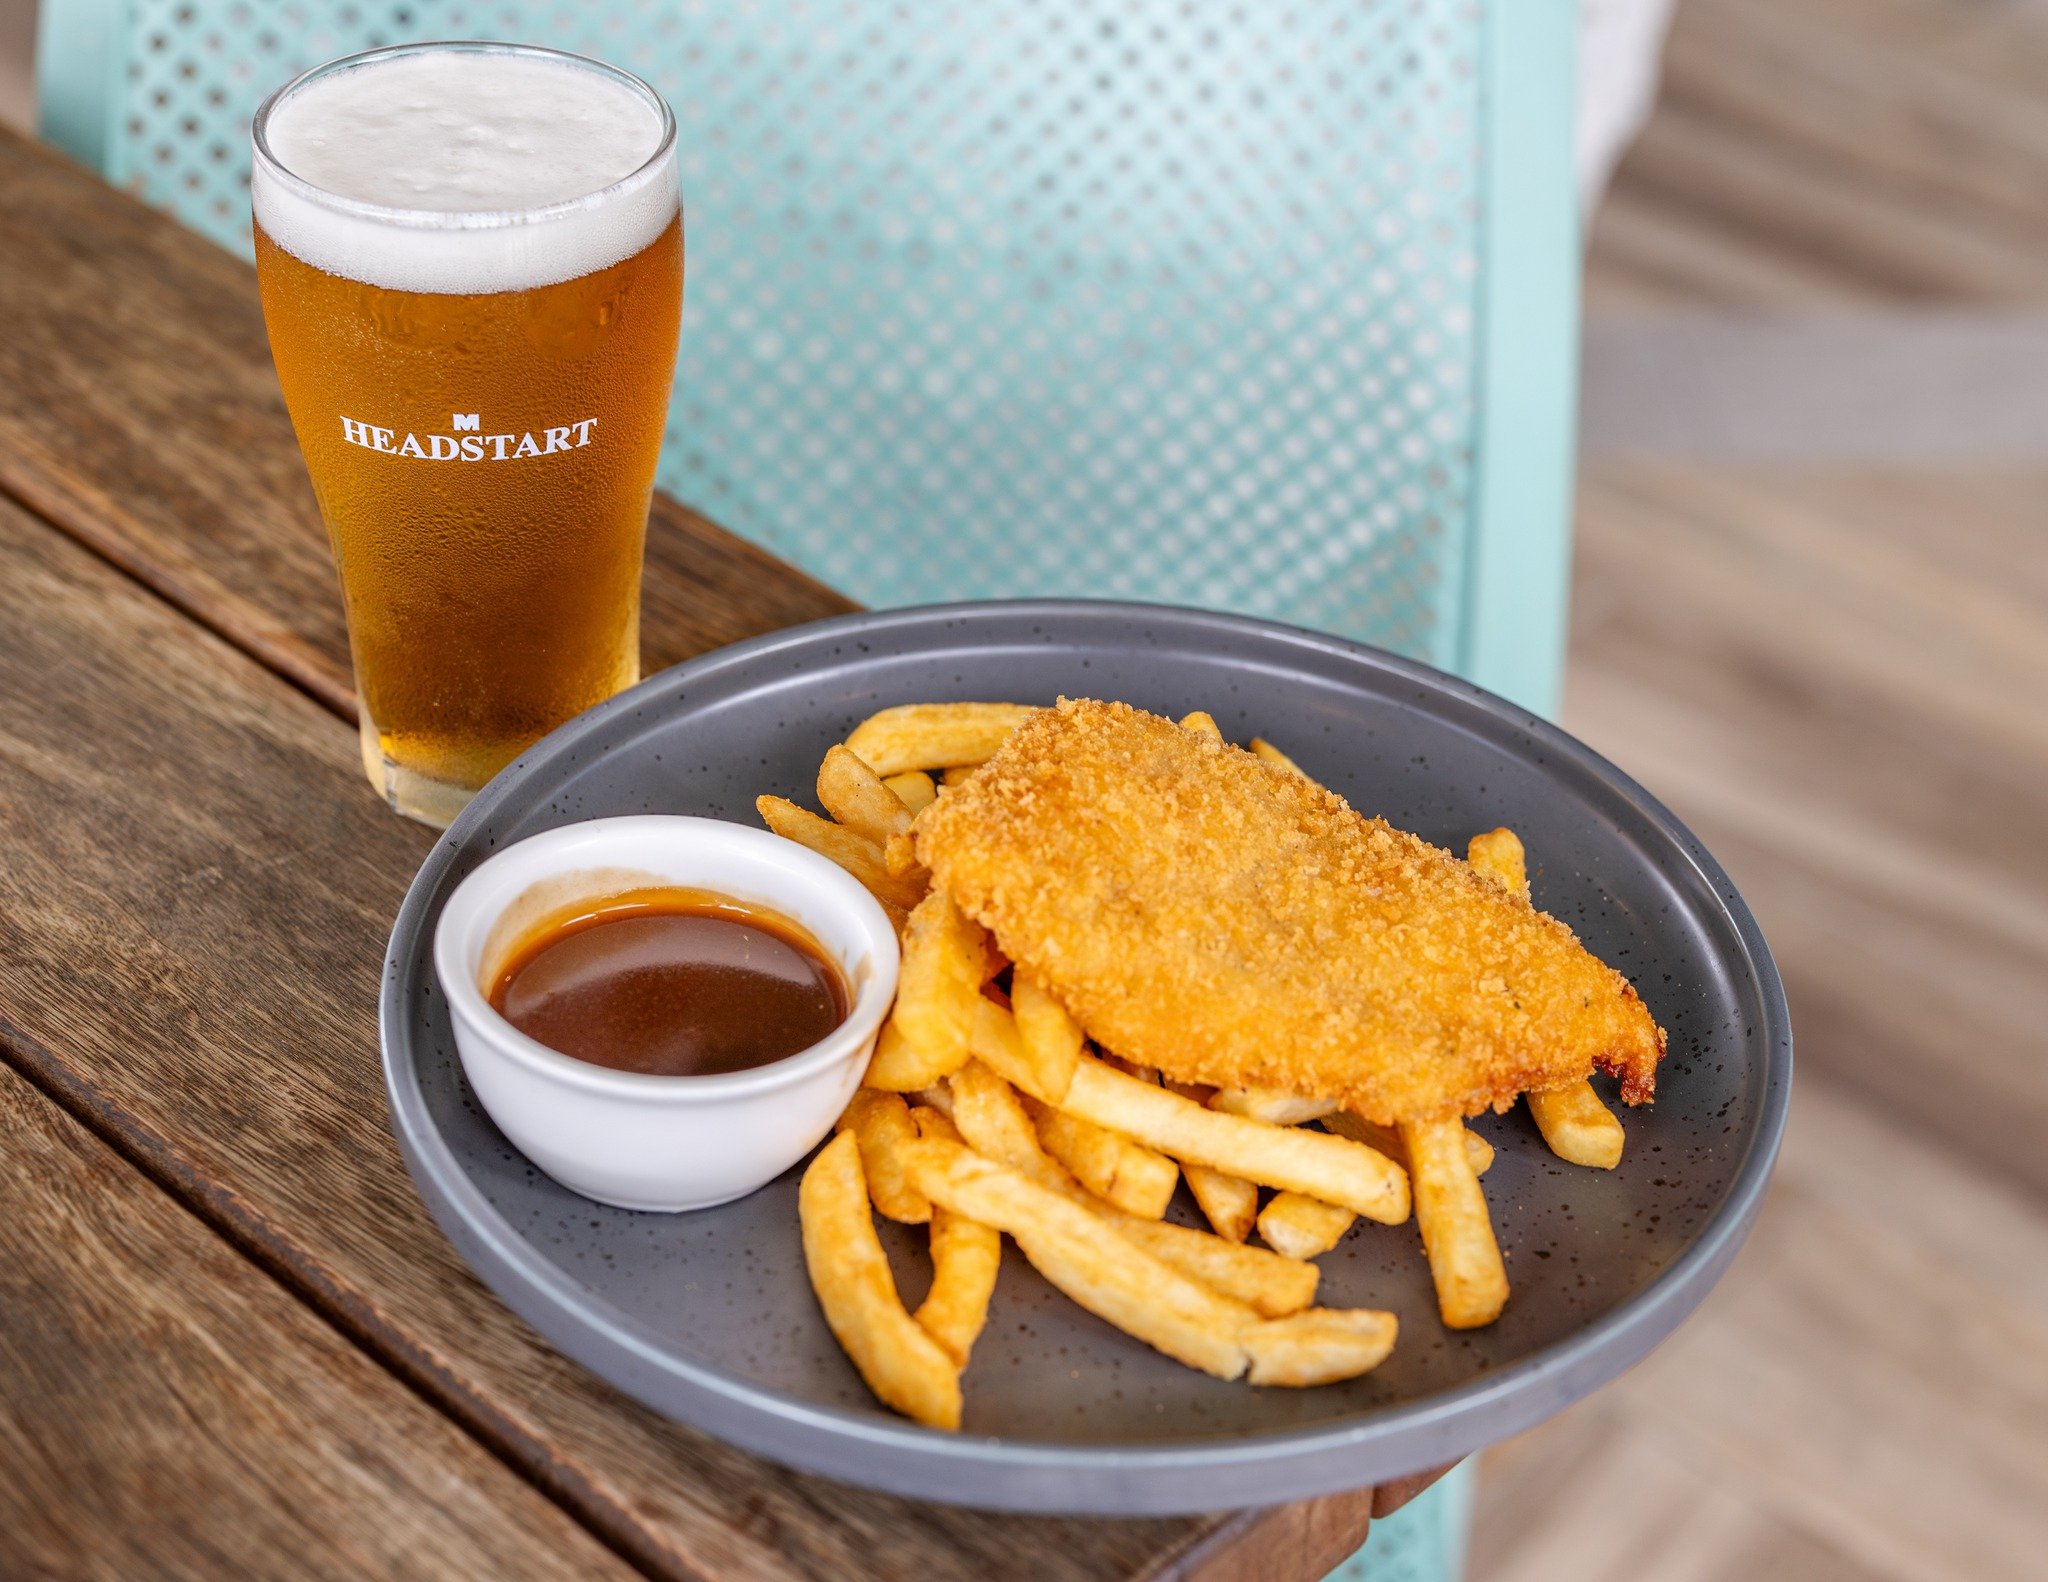 Tradies! Treat yourself to our $20 Friday Bundle! 🤩 

Indulge in a hearty 250g chicken schnitzel paired with beer battered chips, gravy, and a refreshing pot of Great Northern for only $20.

Available every Friday, 11:30am-8:30pm.

Book your table w